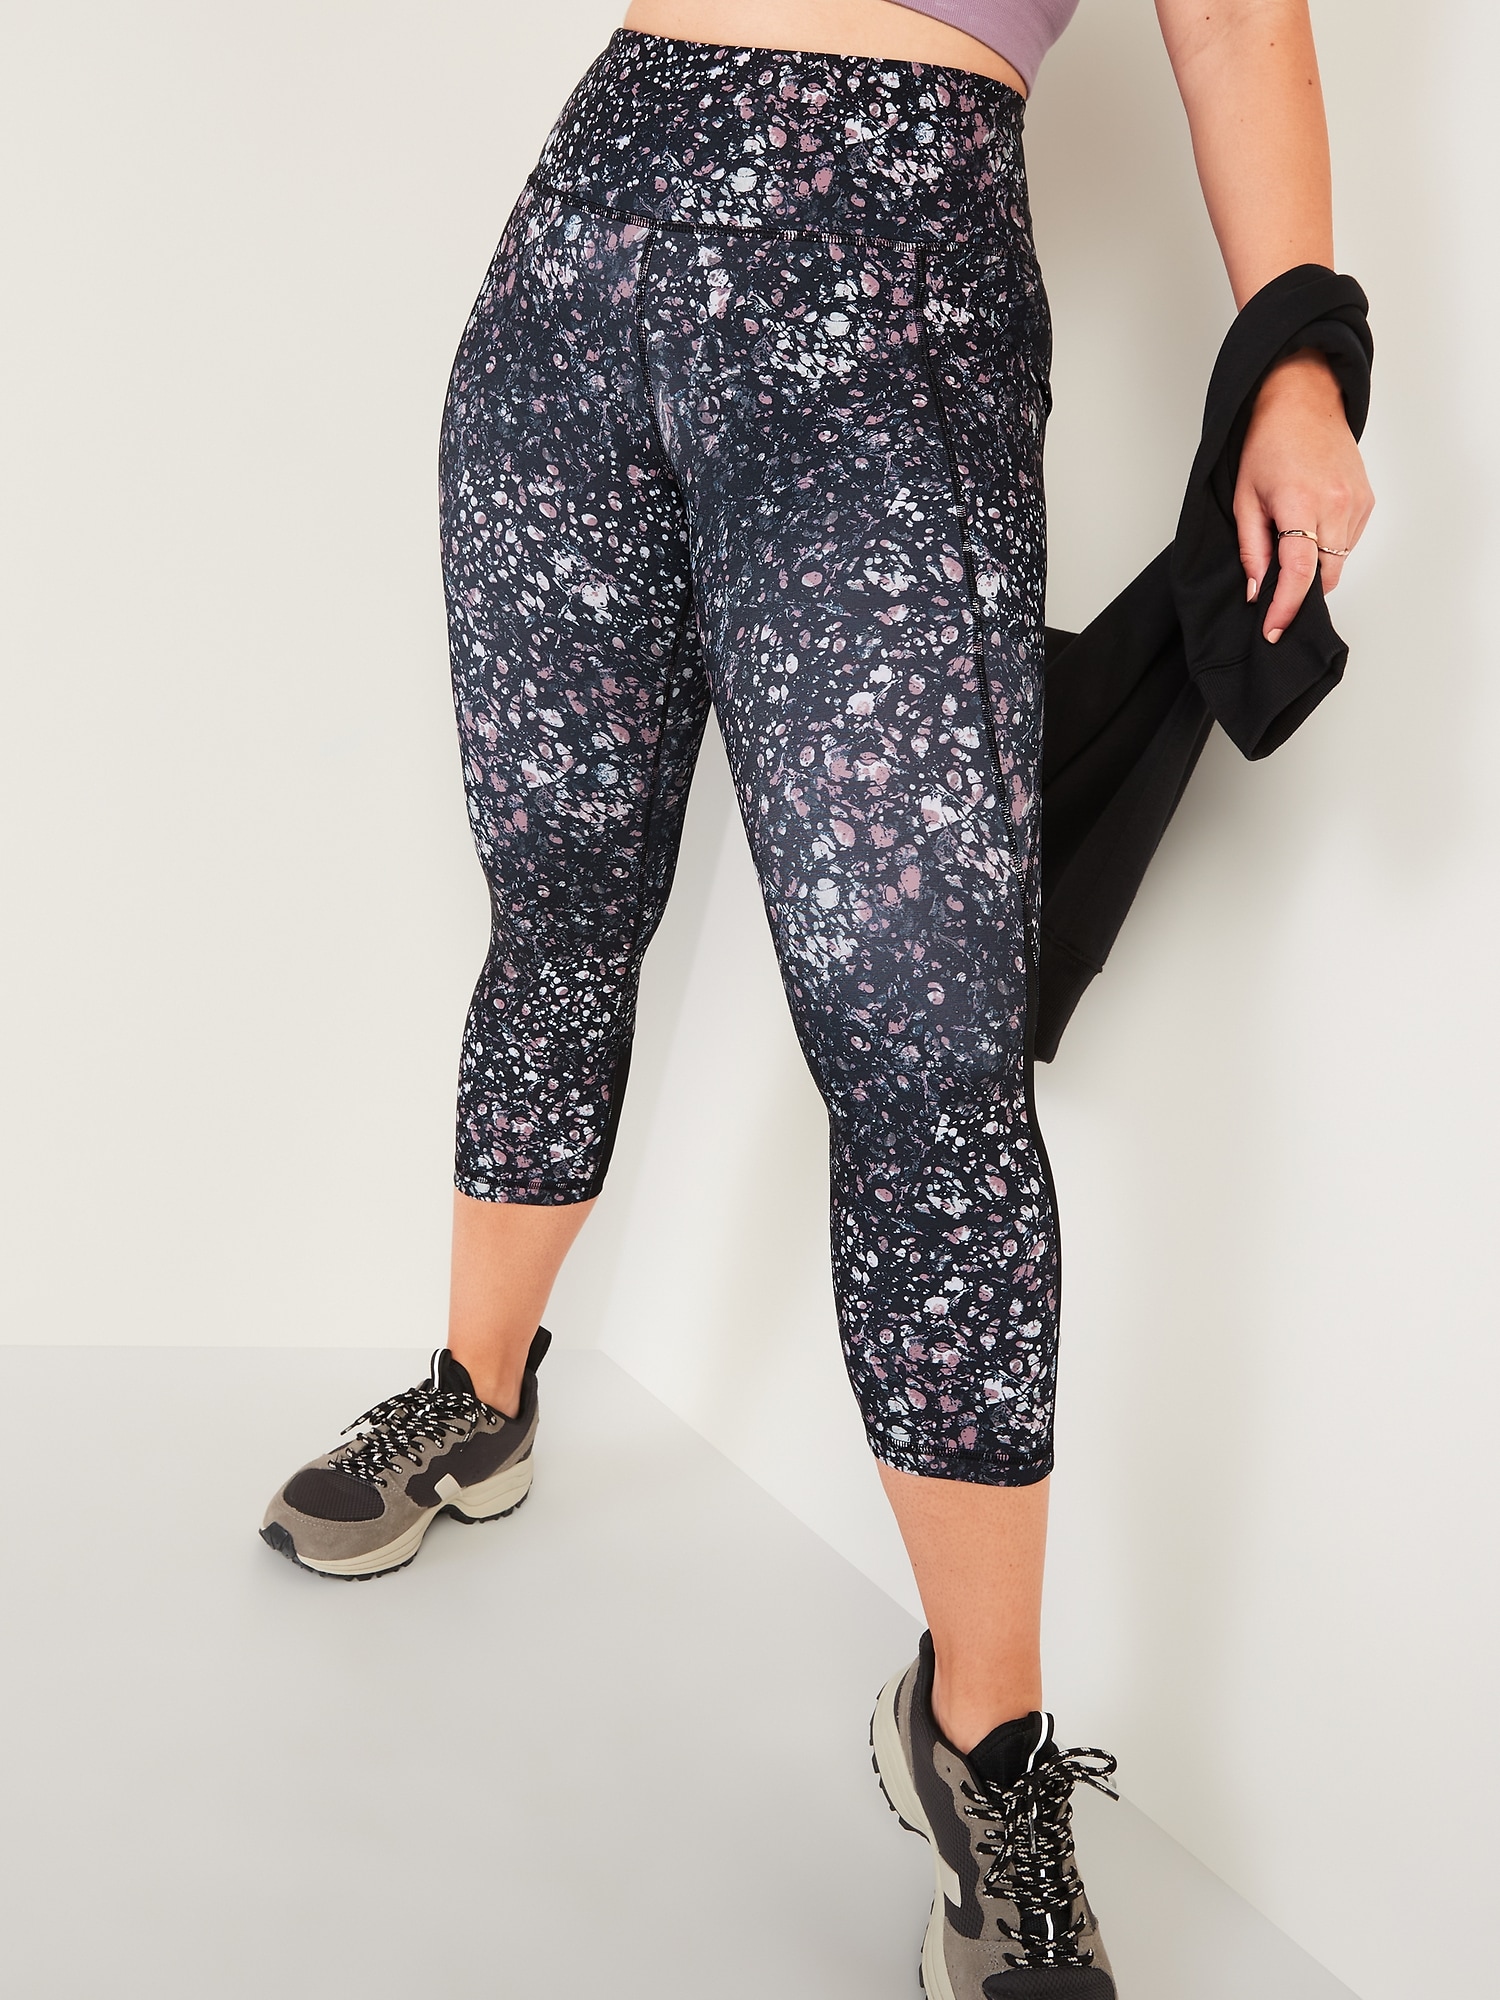 Old Navy - High-Waisted PowerSoft Crop Leggings for Women pink